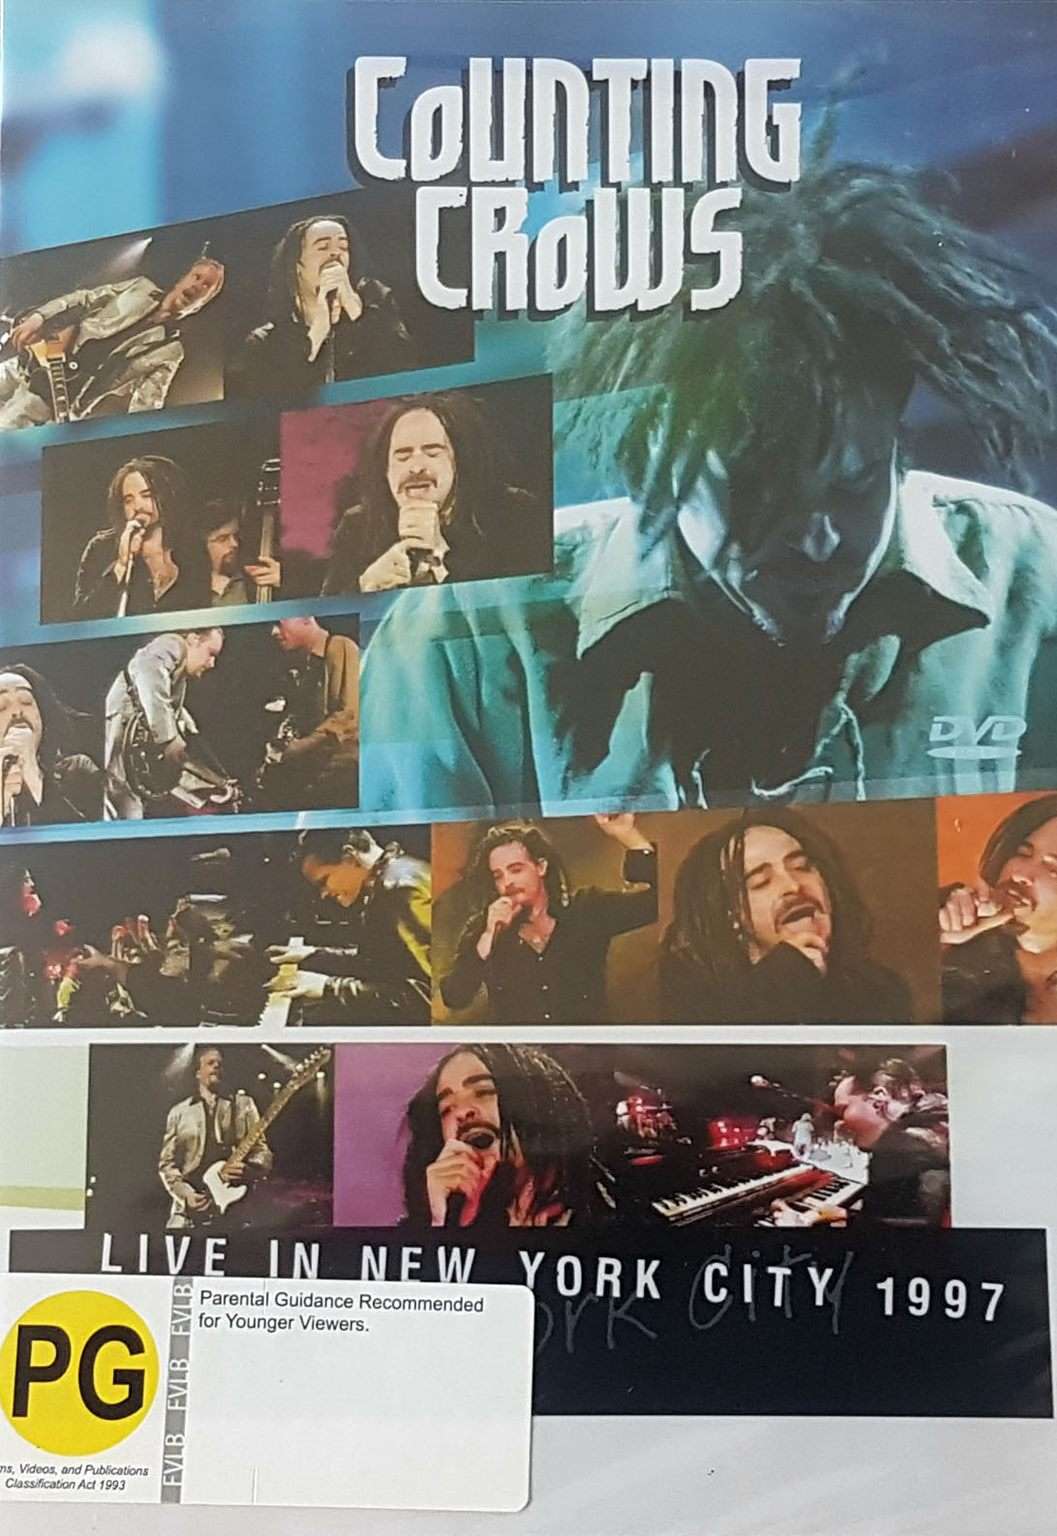 Counting Crows Live in New York City 1997